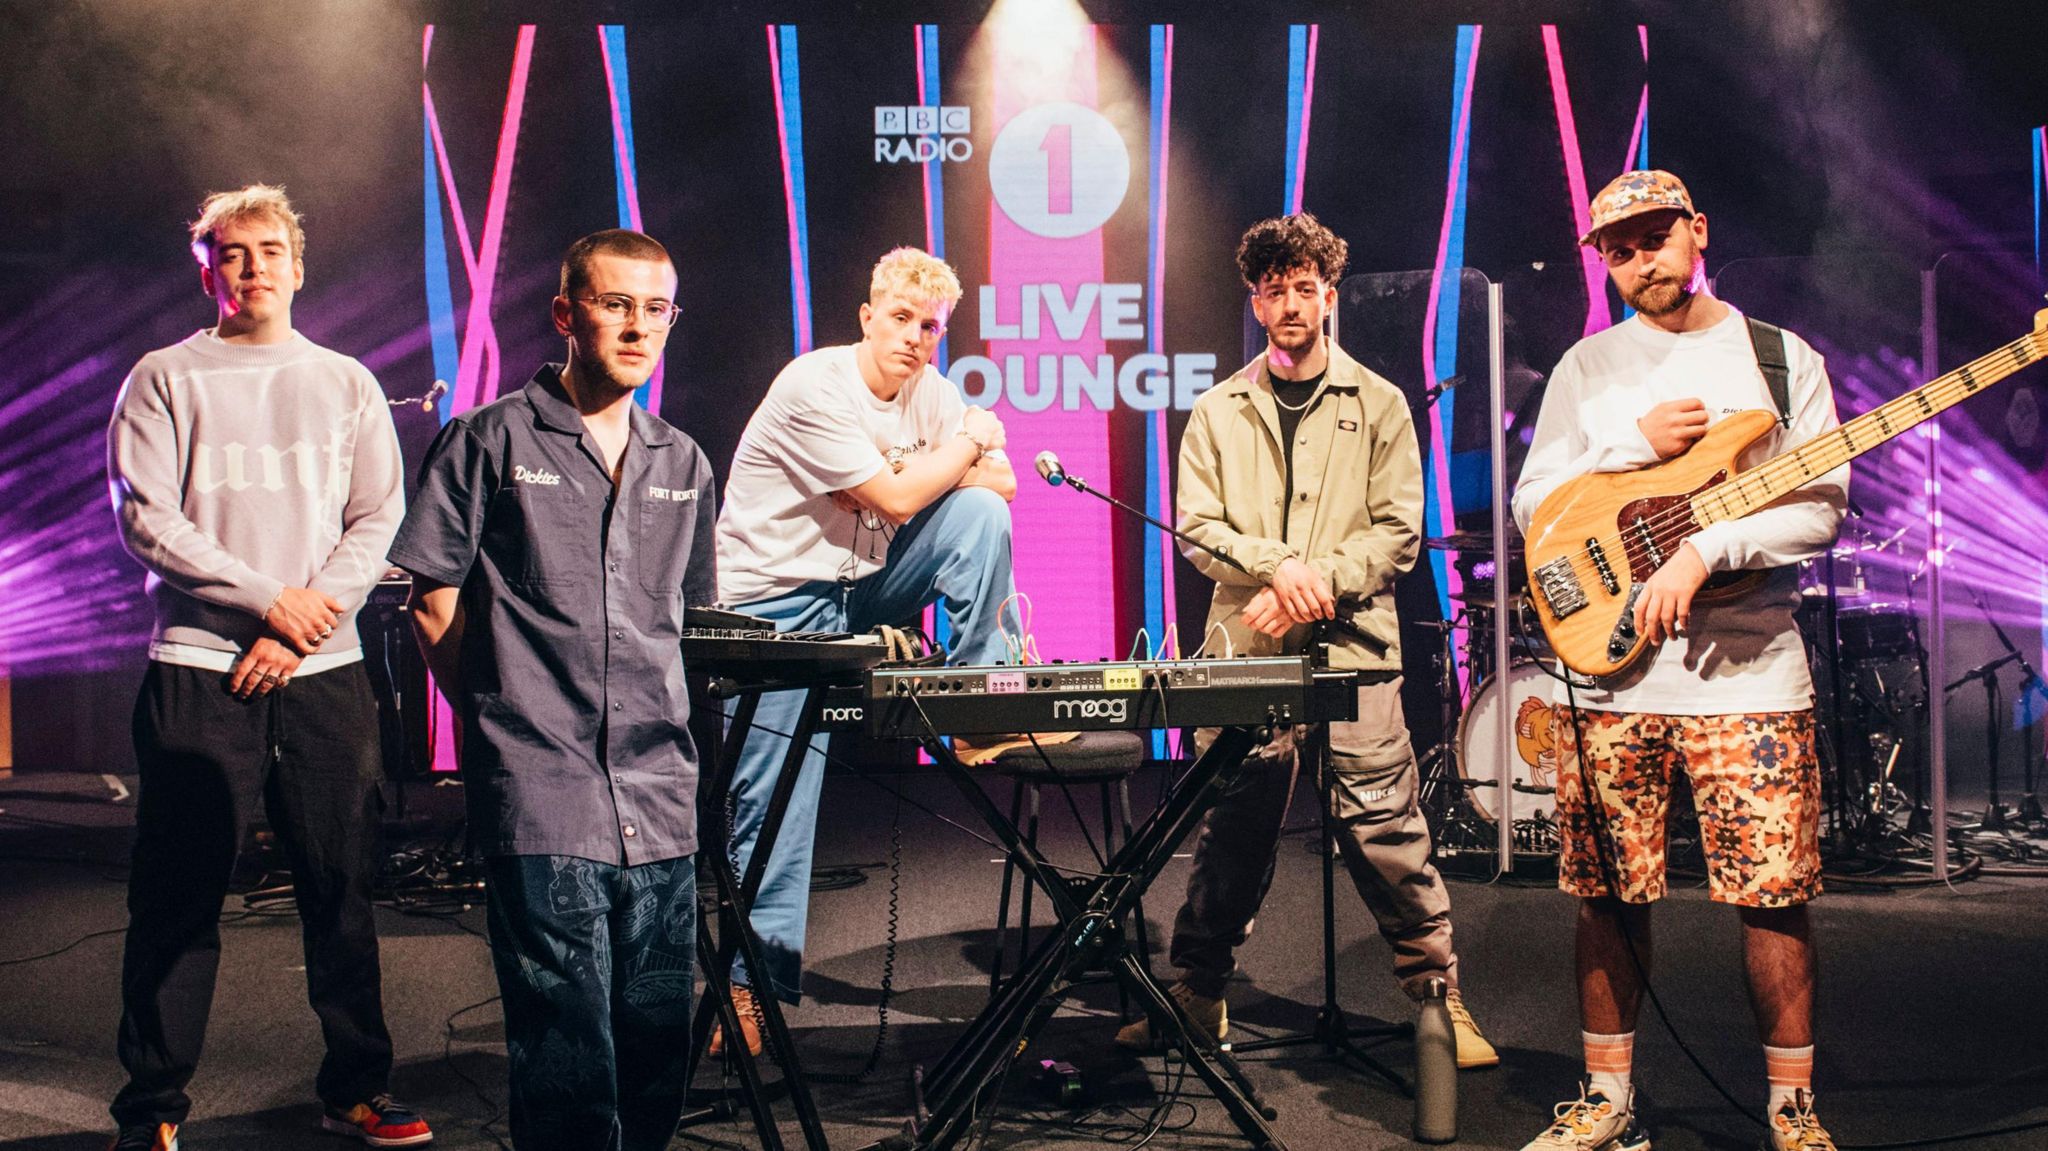 The band formerly known as Easy Life performing in the Radio 1 live lounge in June 2021